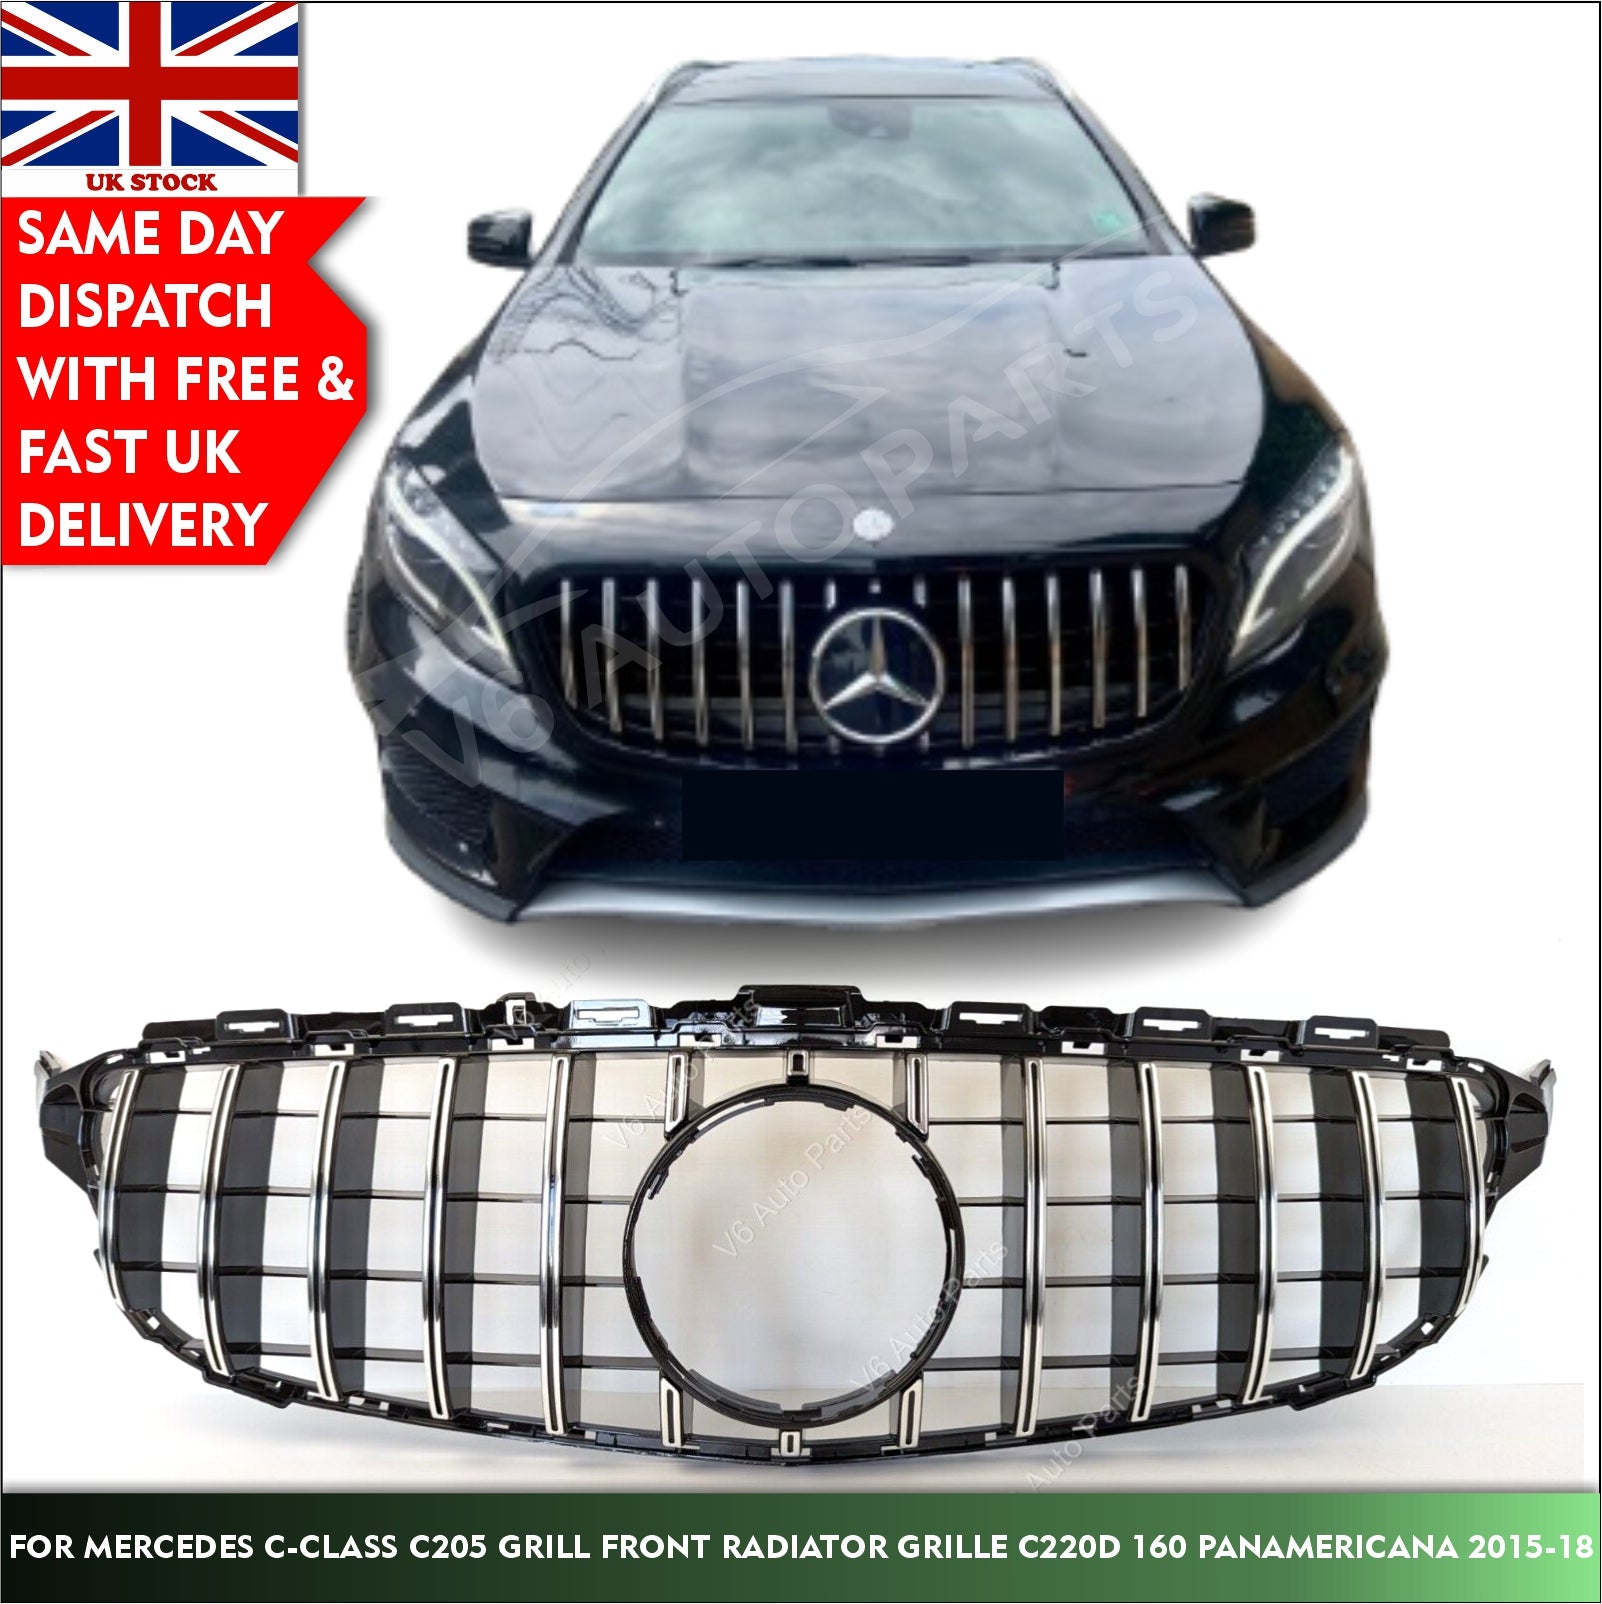 Mercedes C-Class C205 Grill Front Radiator Grille C220d 160 Panamericana 2015-18